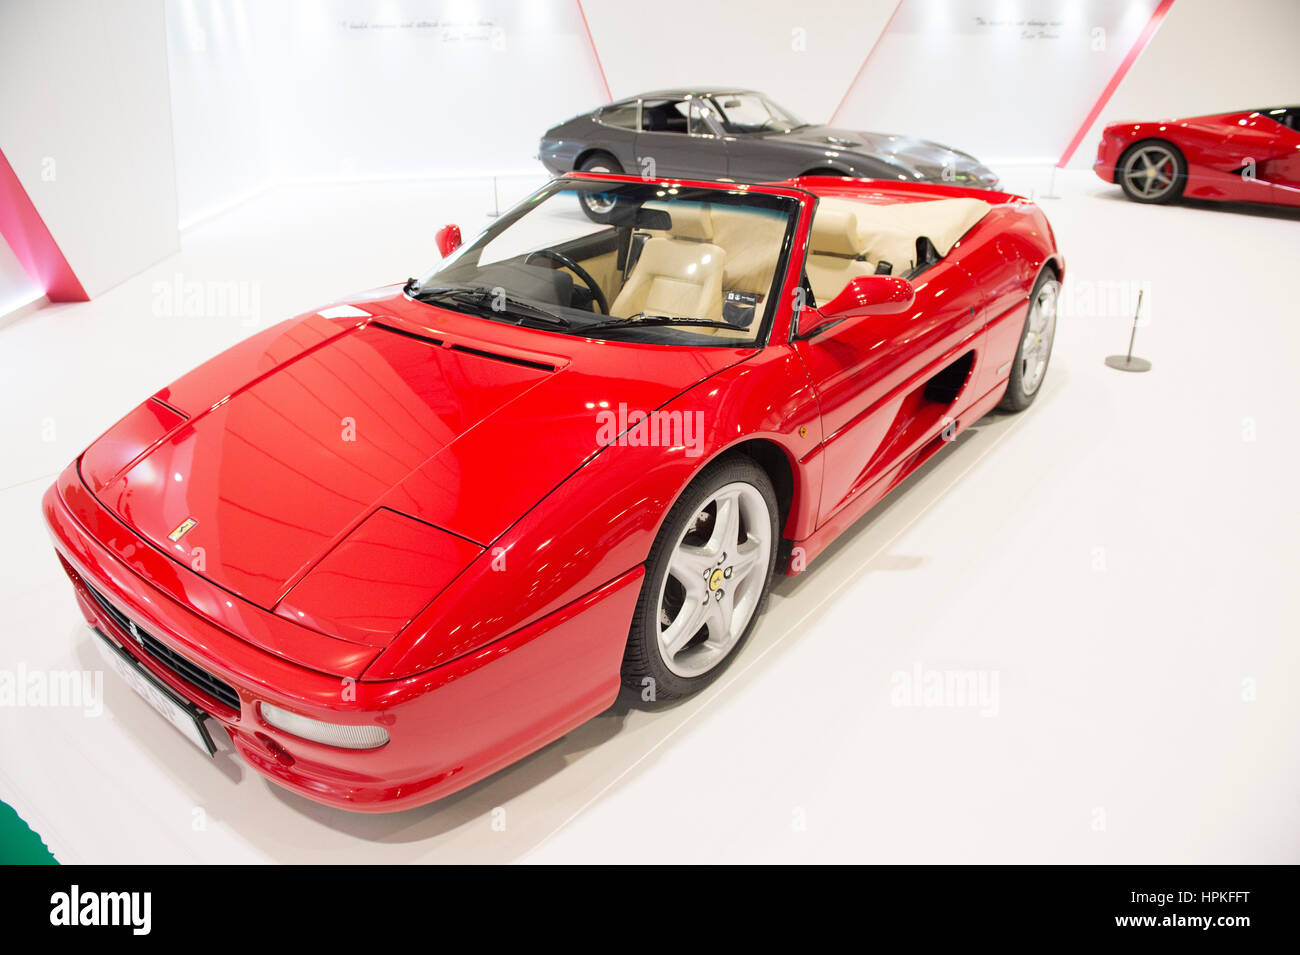 ExCel, London, UK. 23rd February, 2017. Major feature of the 2017 Classic Car Show is a display of 20 iconic Ferrari cars with estimated worth of more than £120 million, photo: 1995 Ferrari F355 Spider open top V8. Credit: Malcolm Park editorial/Alamy Live News. Stock Photo